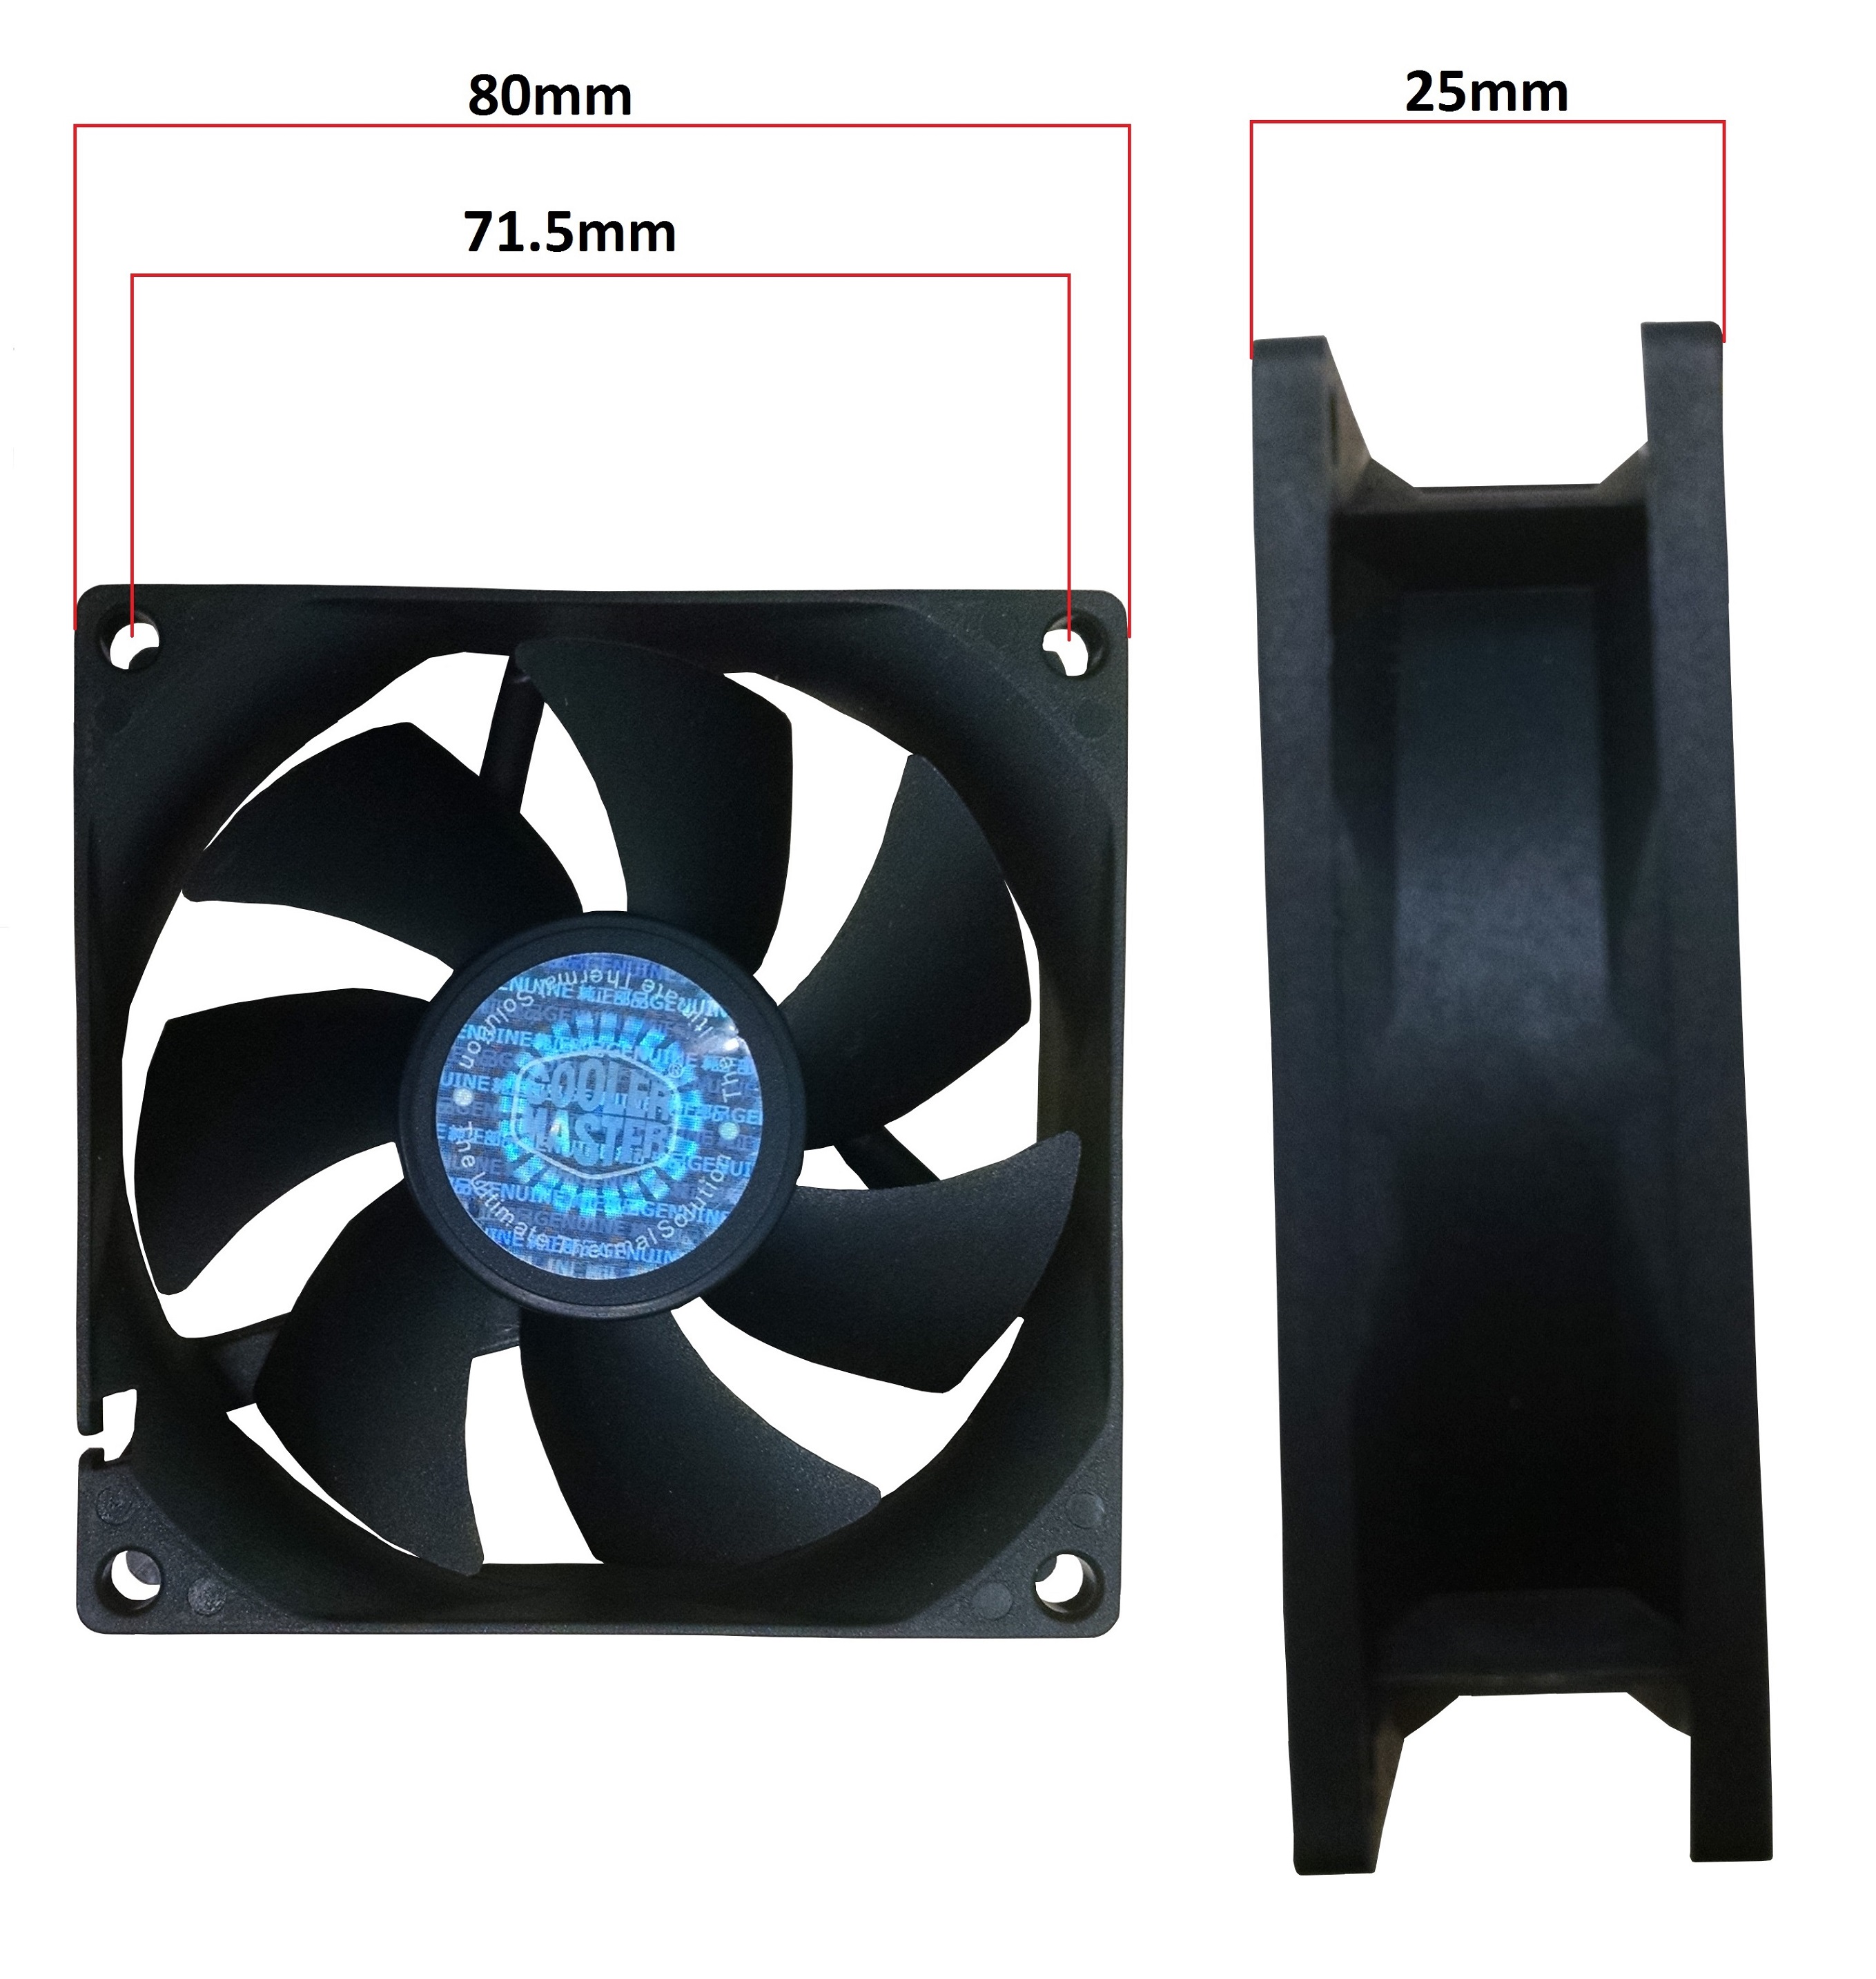 Børnepalads etnisk maling What are the dimensions of a 80mm fan | Cooler Master FAQ